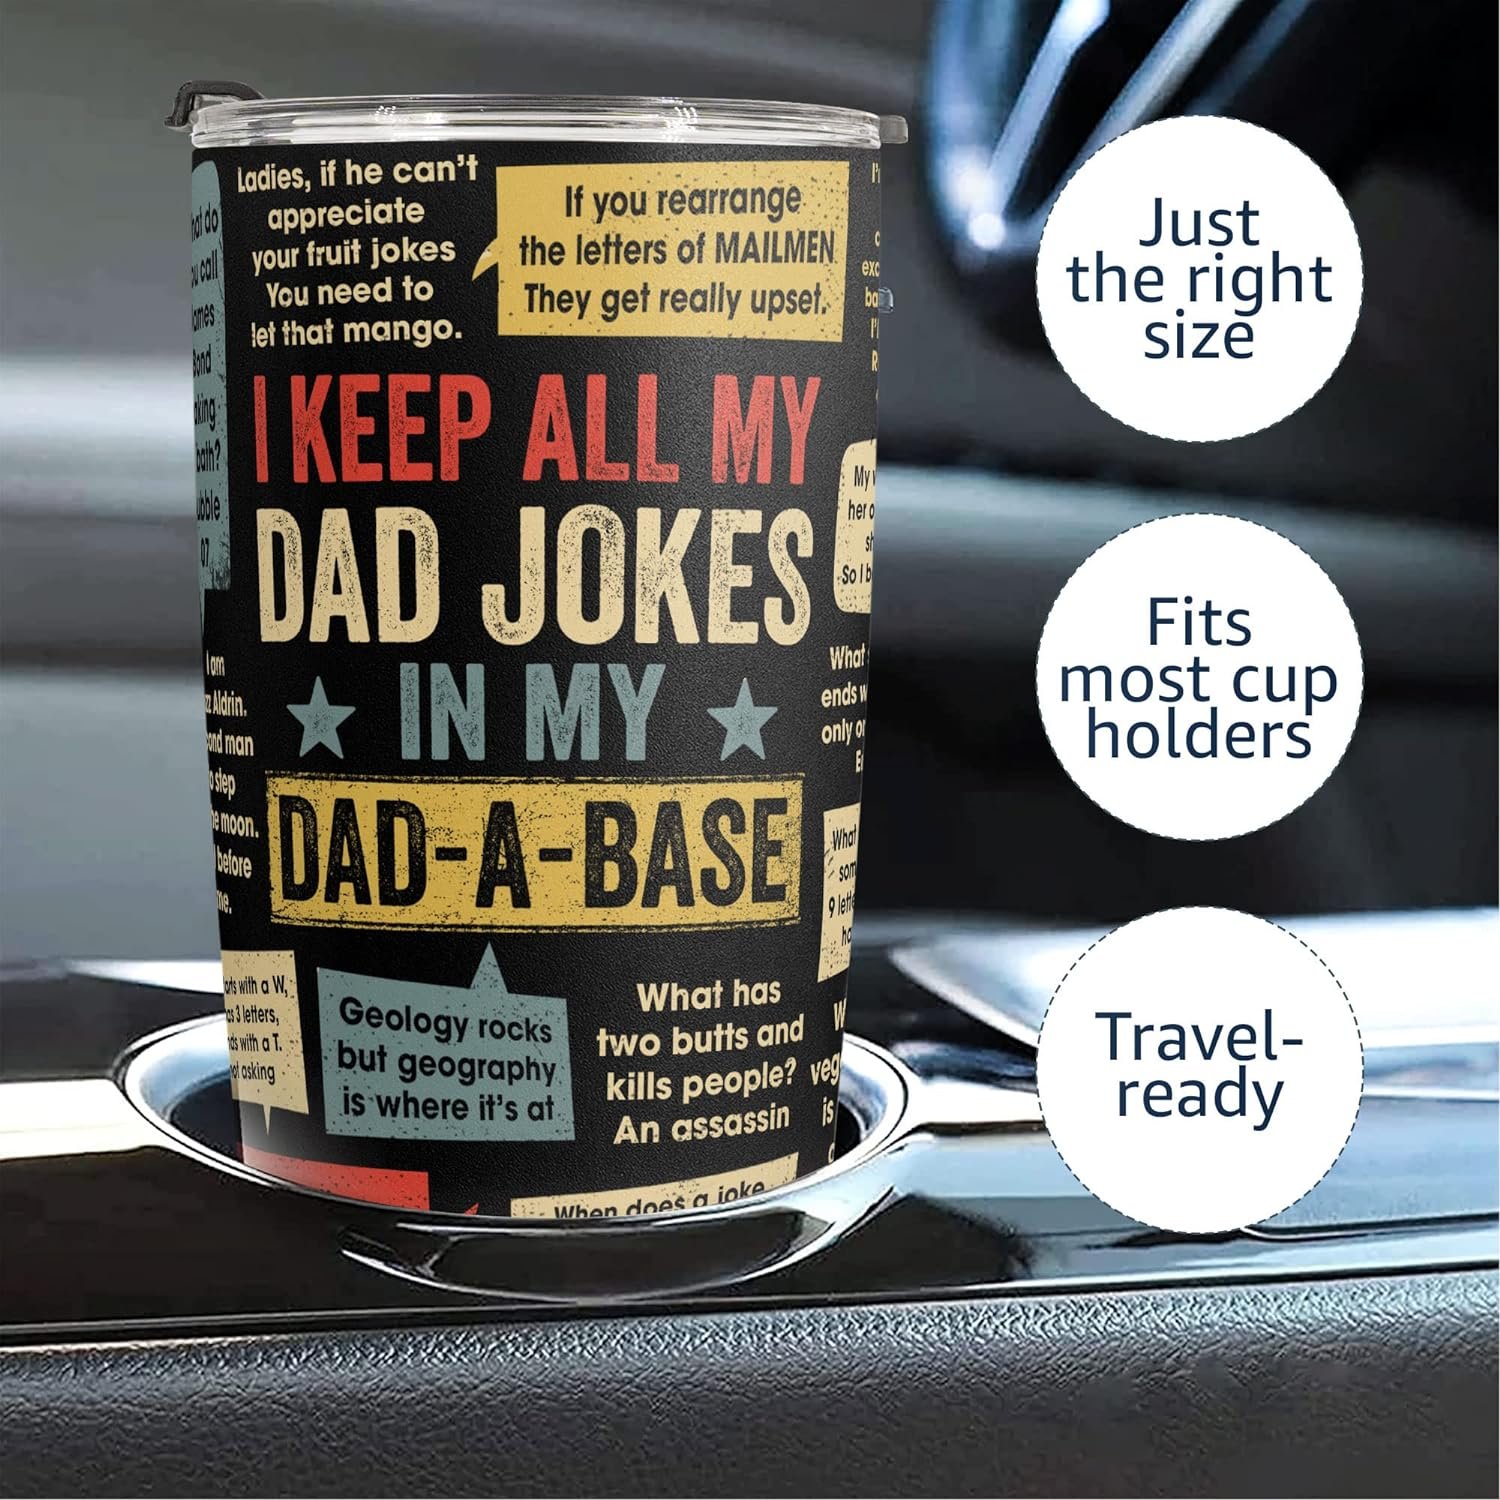 Macorner Gift For Dad - Stainless Steel Tumbler 20oz - Dad Joke Birthday Gift for Dad Men Gift - Fathers Day Gift From Daughter Son Wife - Funny Christmas Gift For Men Dad Stepdad Bonus Dad Uncle